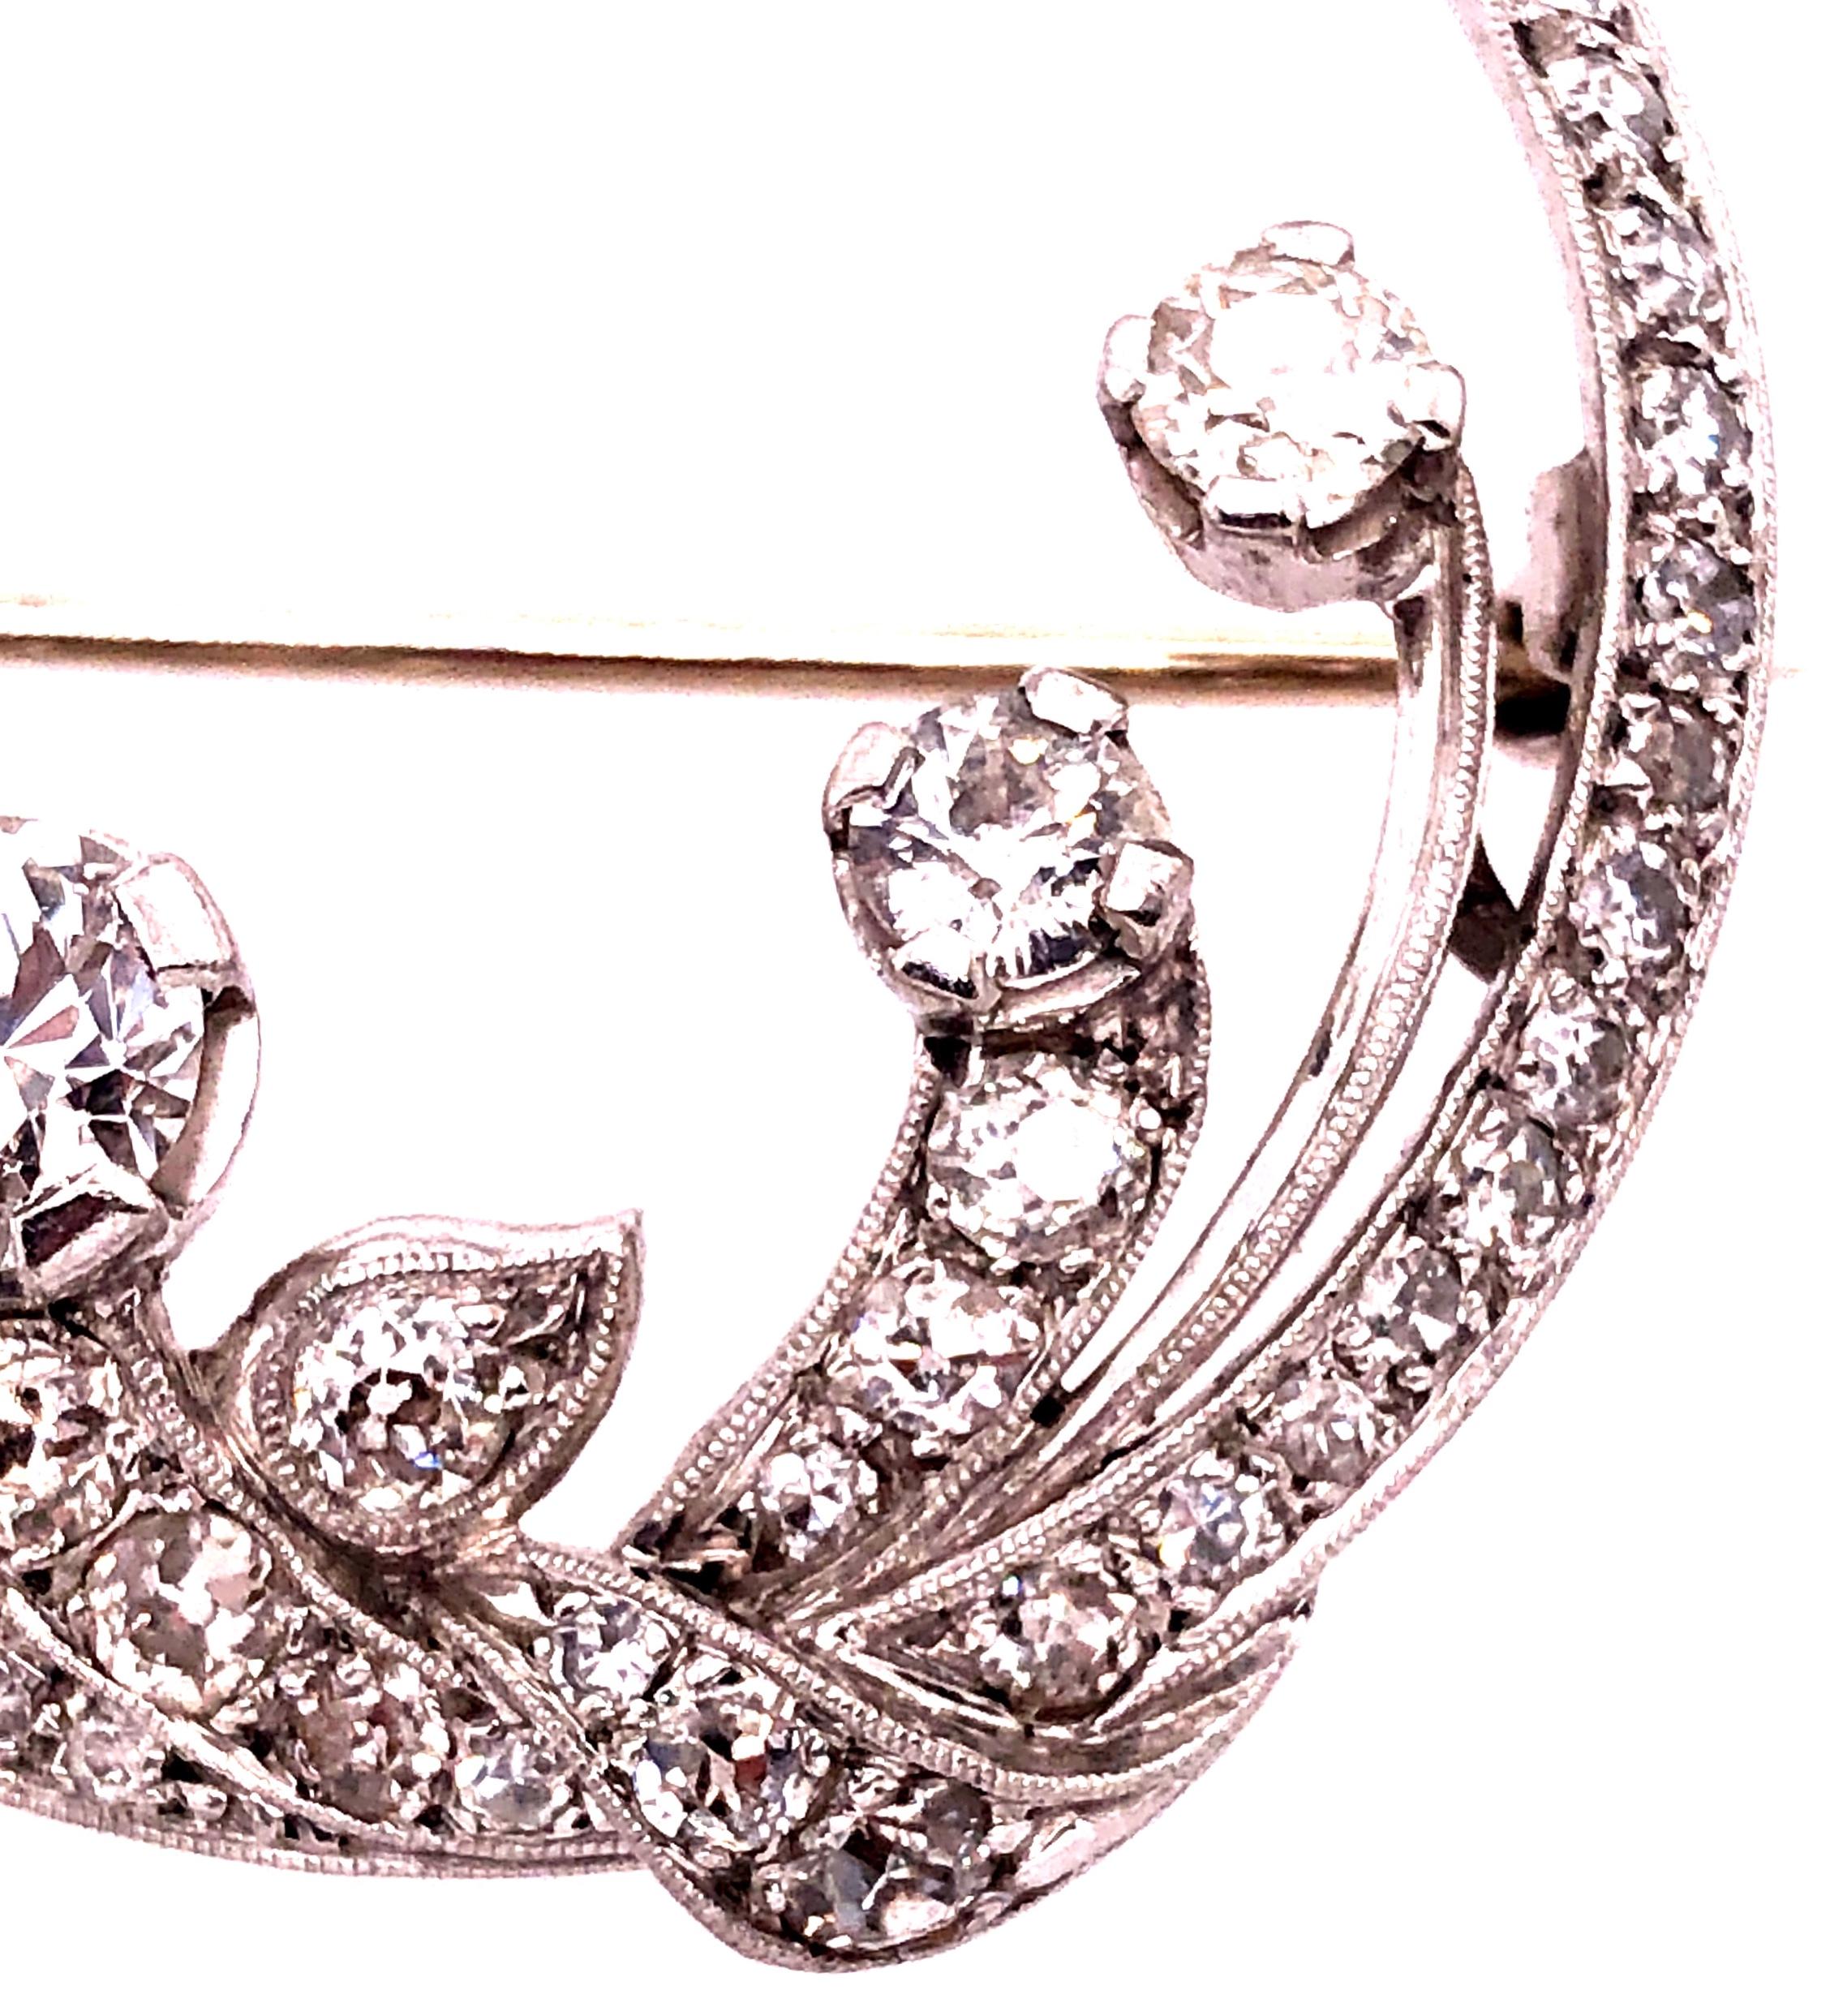 14 Karat White Gold Vintage Diamond Circle Pin / Brooch having a floral design set with a large .60 round diamond of excellent quality in the center flanked by three .20 round diamonds and eight graduating diamonds leading to a circular frame of 45